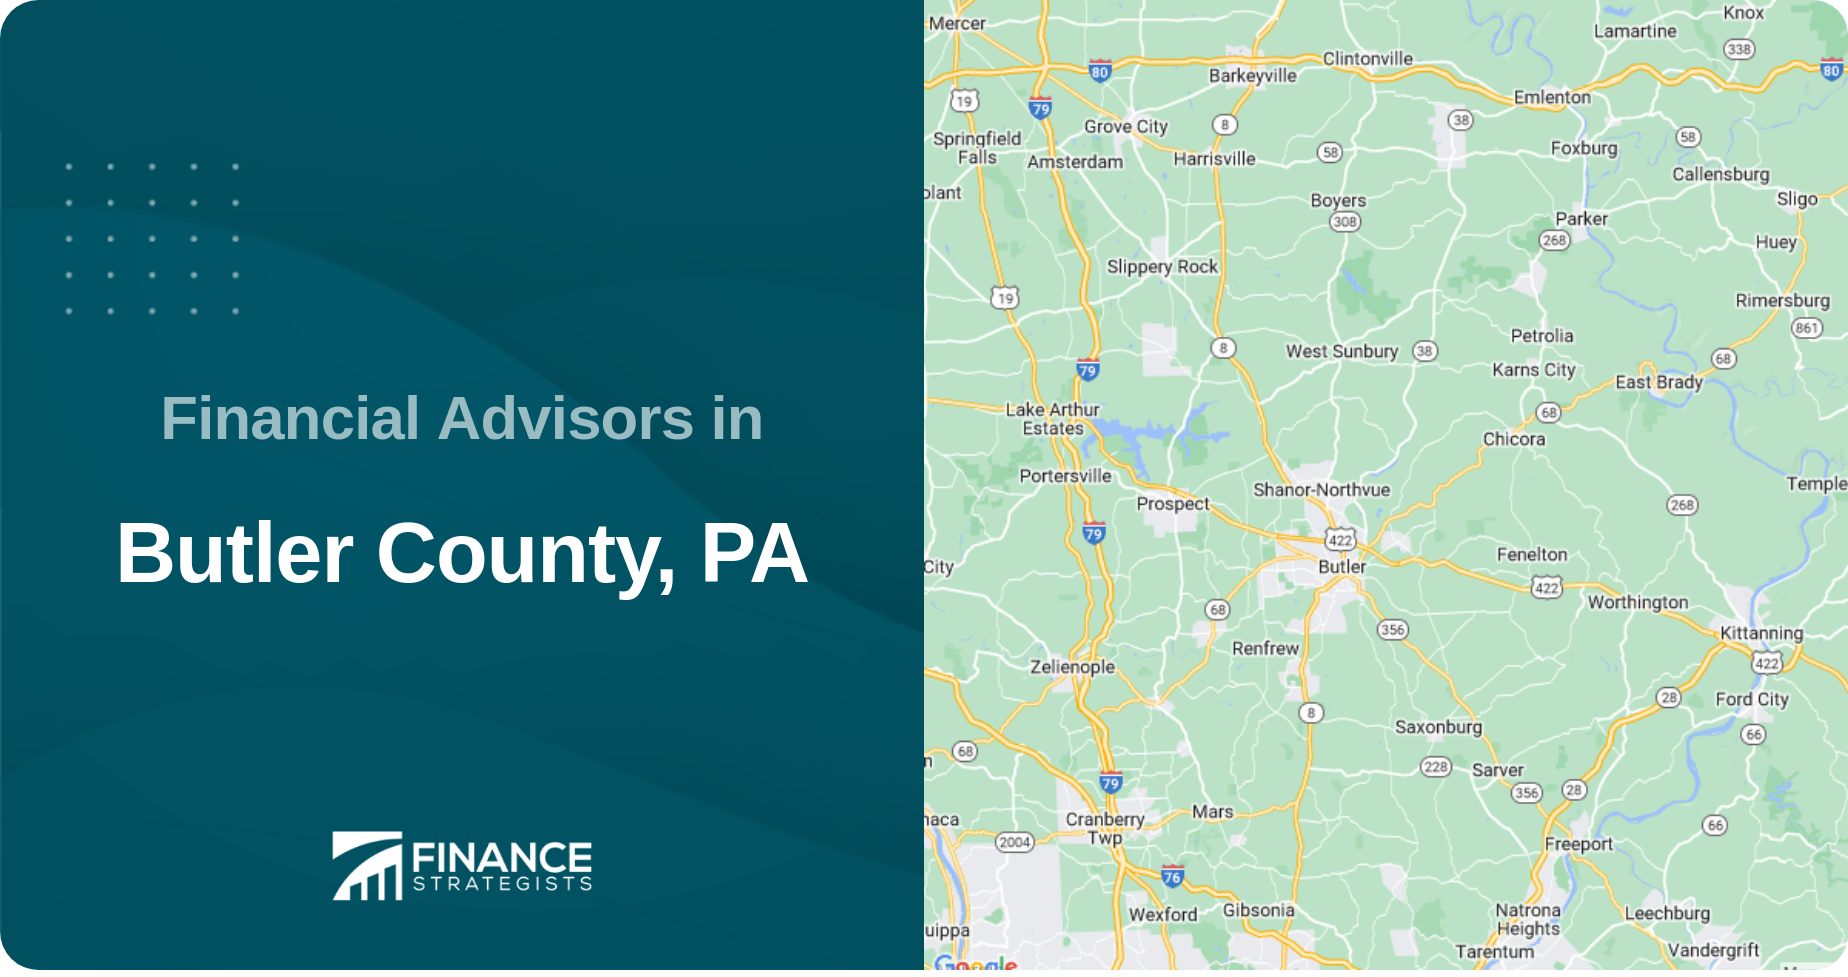 Financial Advisors in Butler County, PA